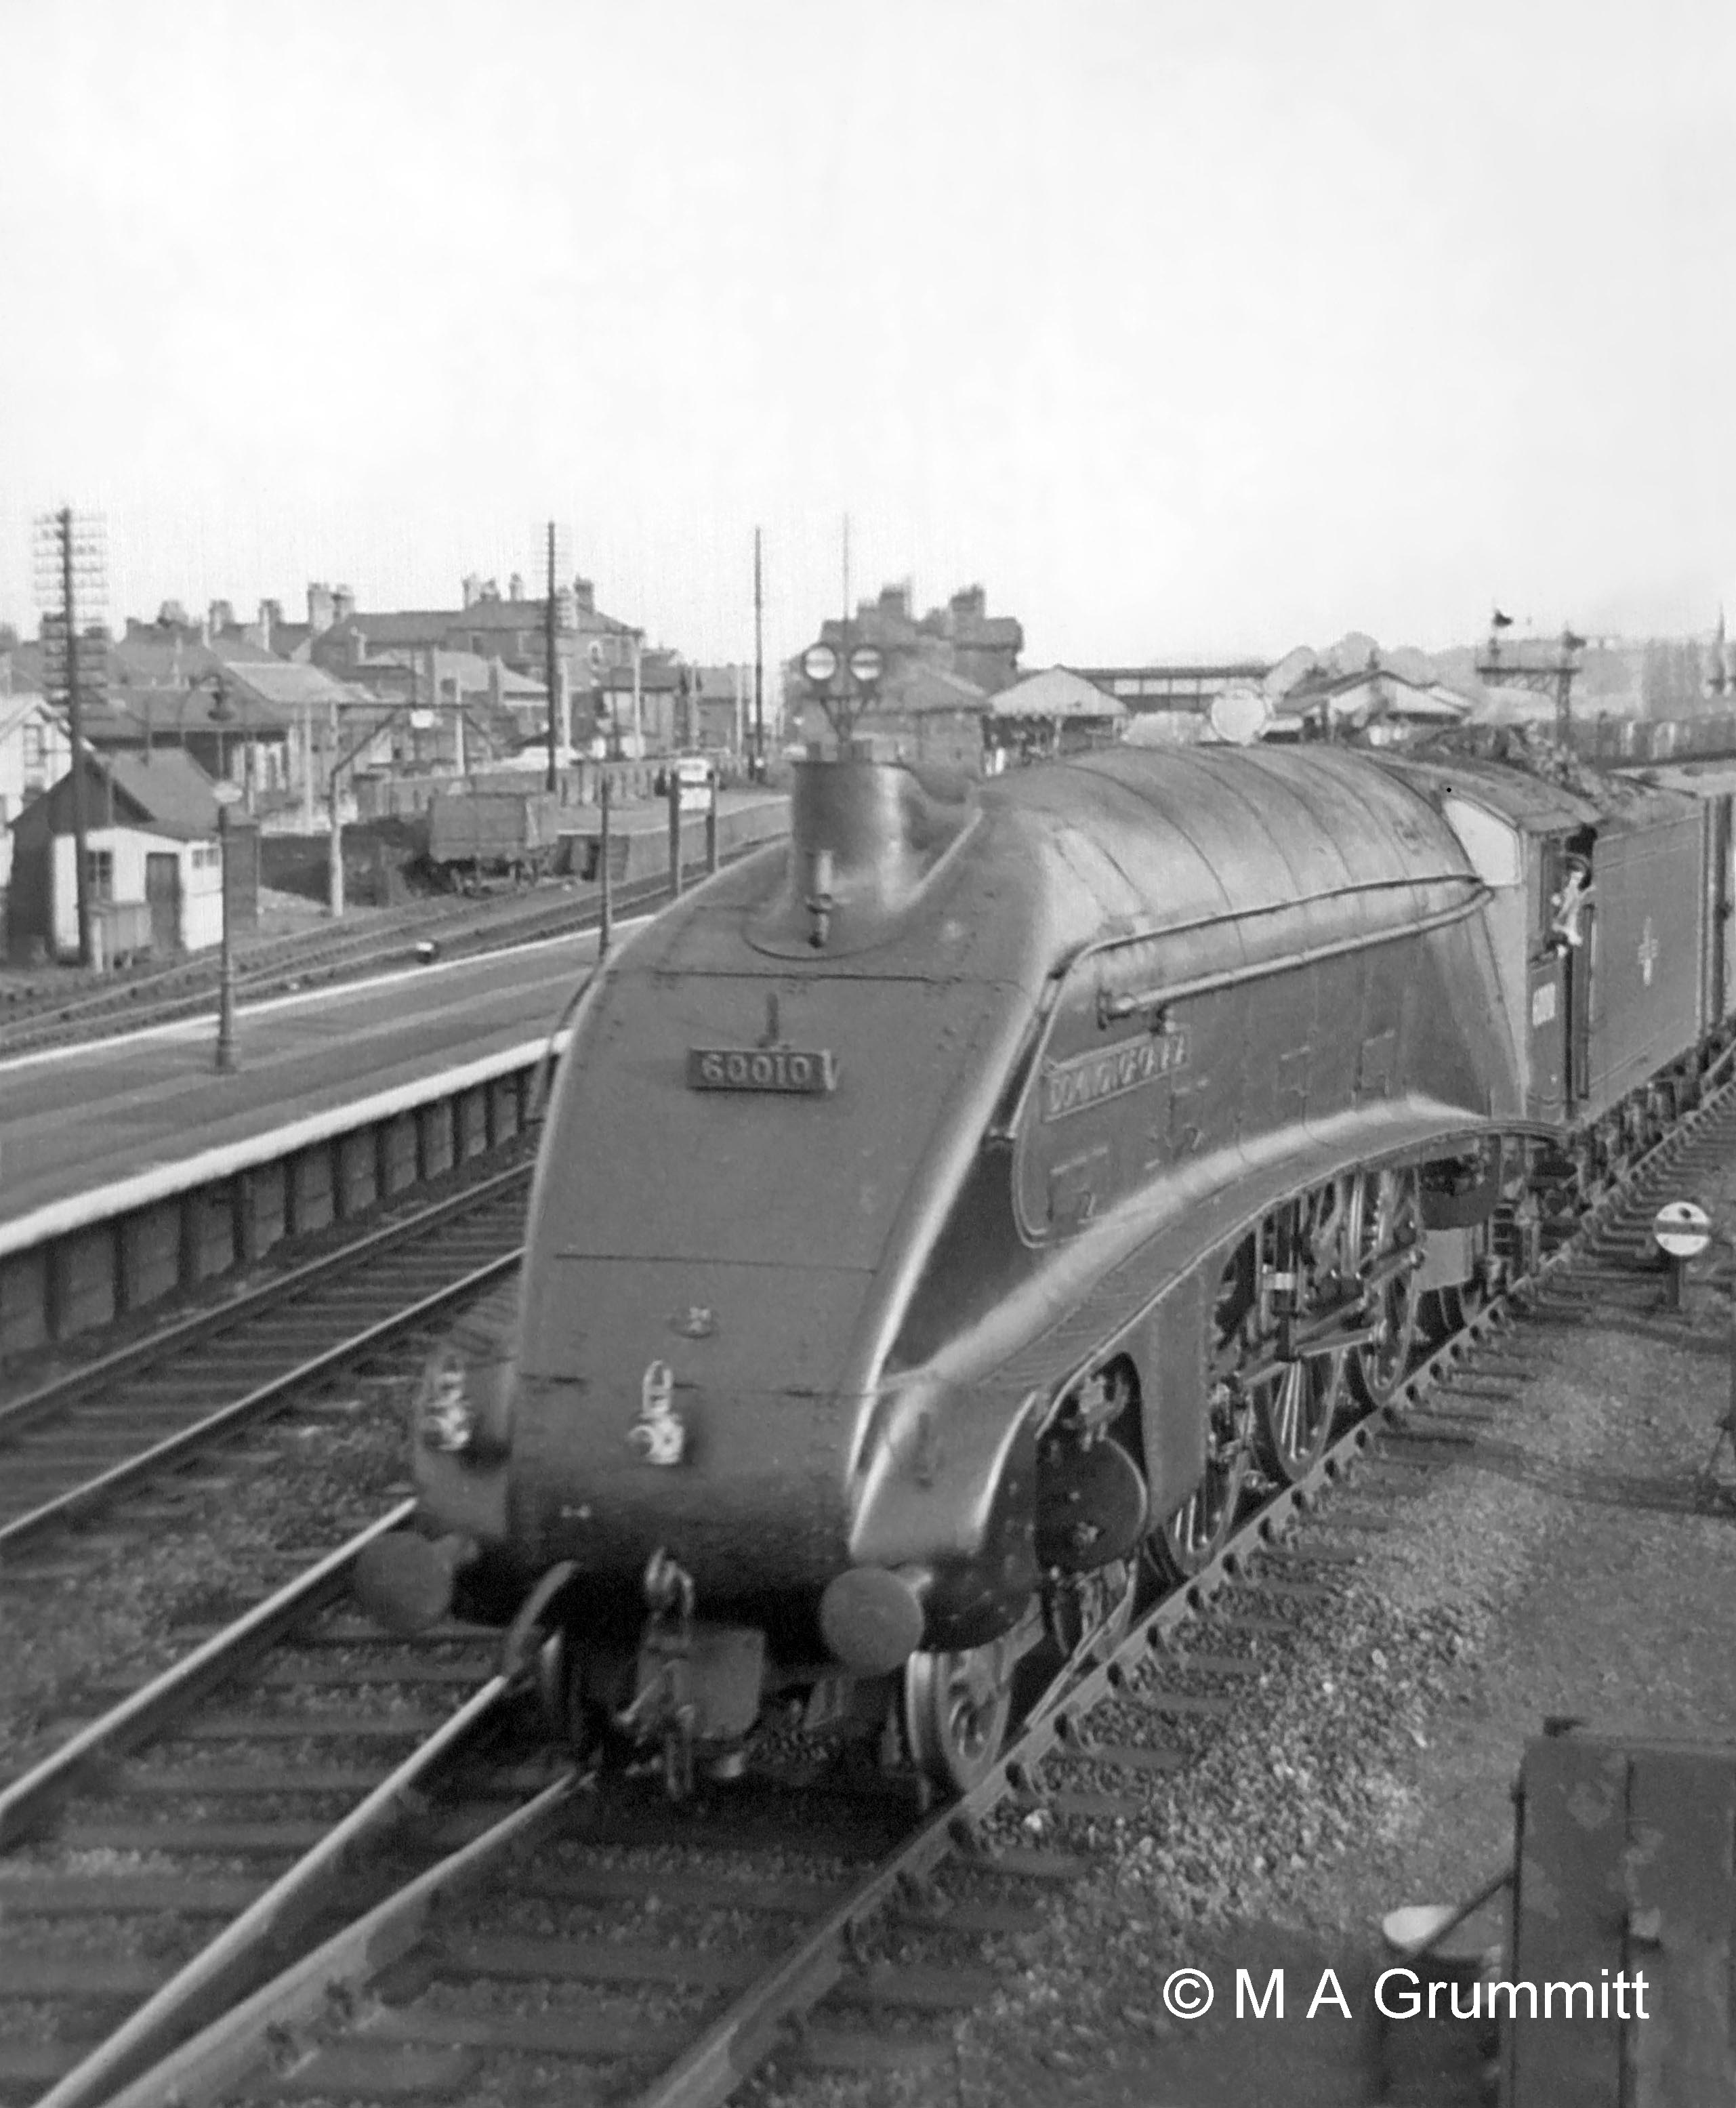  Here is train No. 266, the ‘Scotch Goods’ from King’s Cross Goods Yard to Niddrie in Edinburgh, resuming it journey after stopping to take water on the Goods line. The fireman of this train would normally have refilled its tender at Werrington water troughs just north of Peterborough, and it would rattle through Grantham at speed on the Main line. On this occasion Werrington troughs were out of action for repairs so it was booked to stop at Grantham for water. No.60010 Dominion of Canada. Photograph by Mick Grummitt.